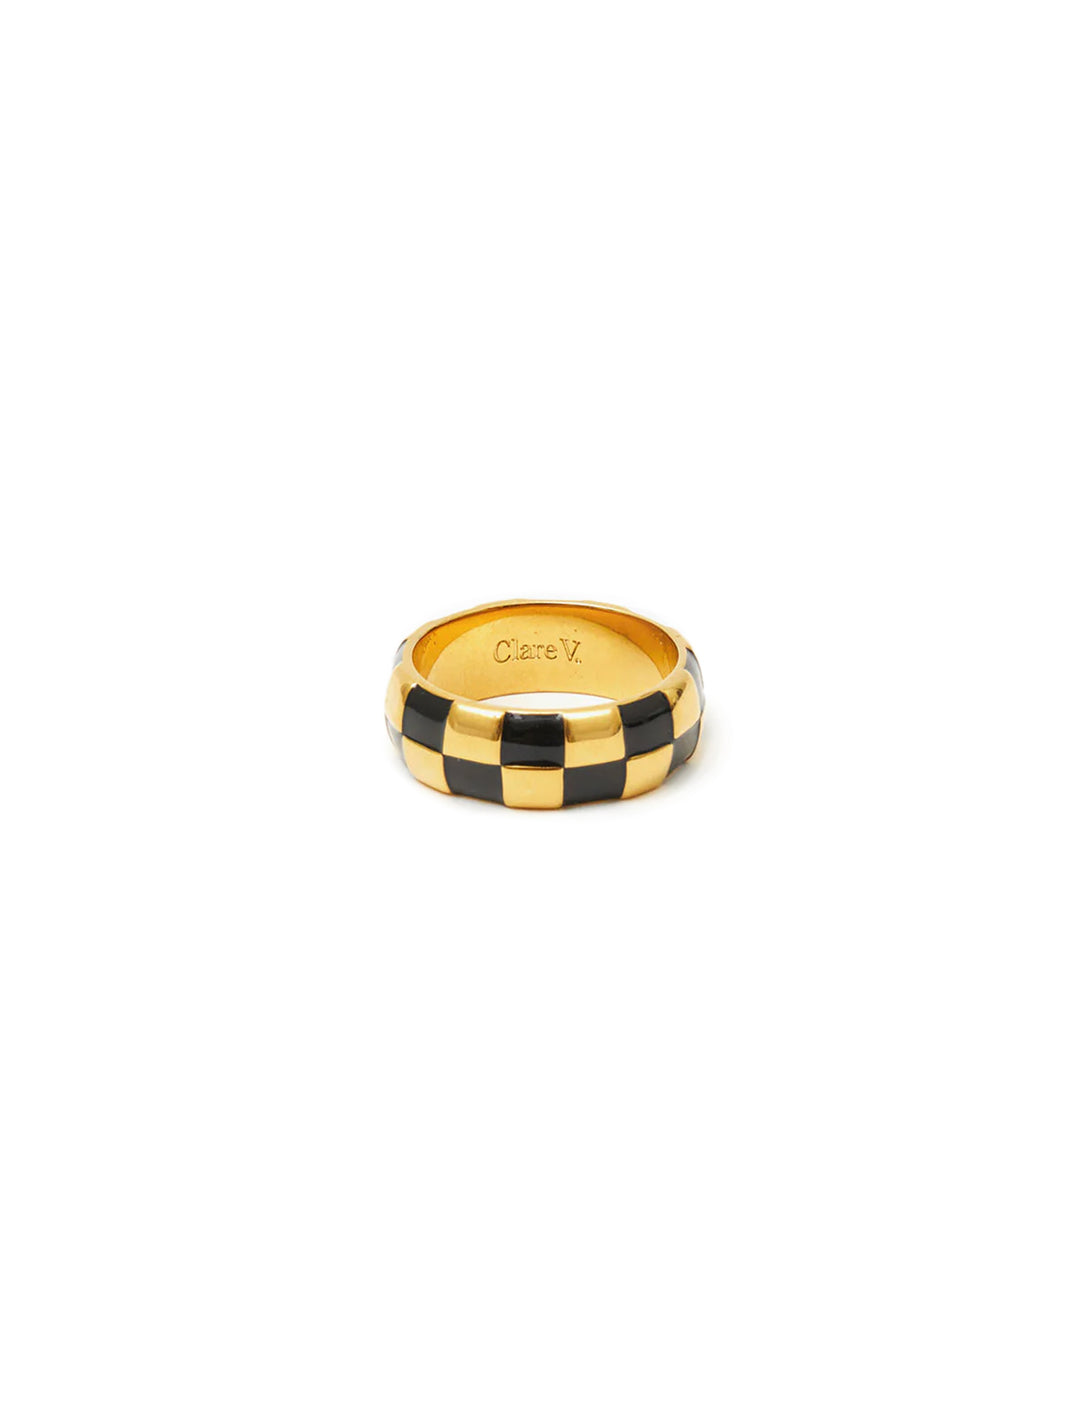 Front view of Clare V.'s black checkered enamel ring.